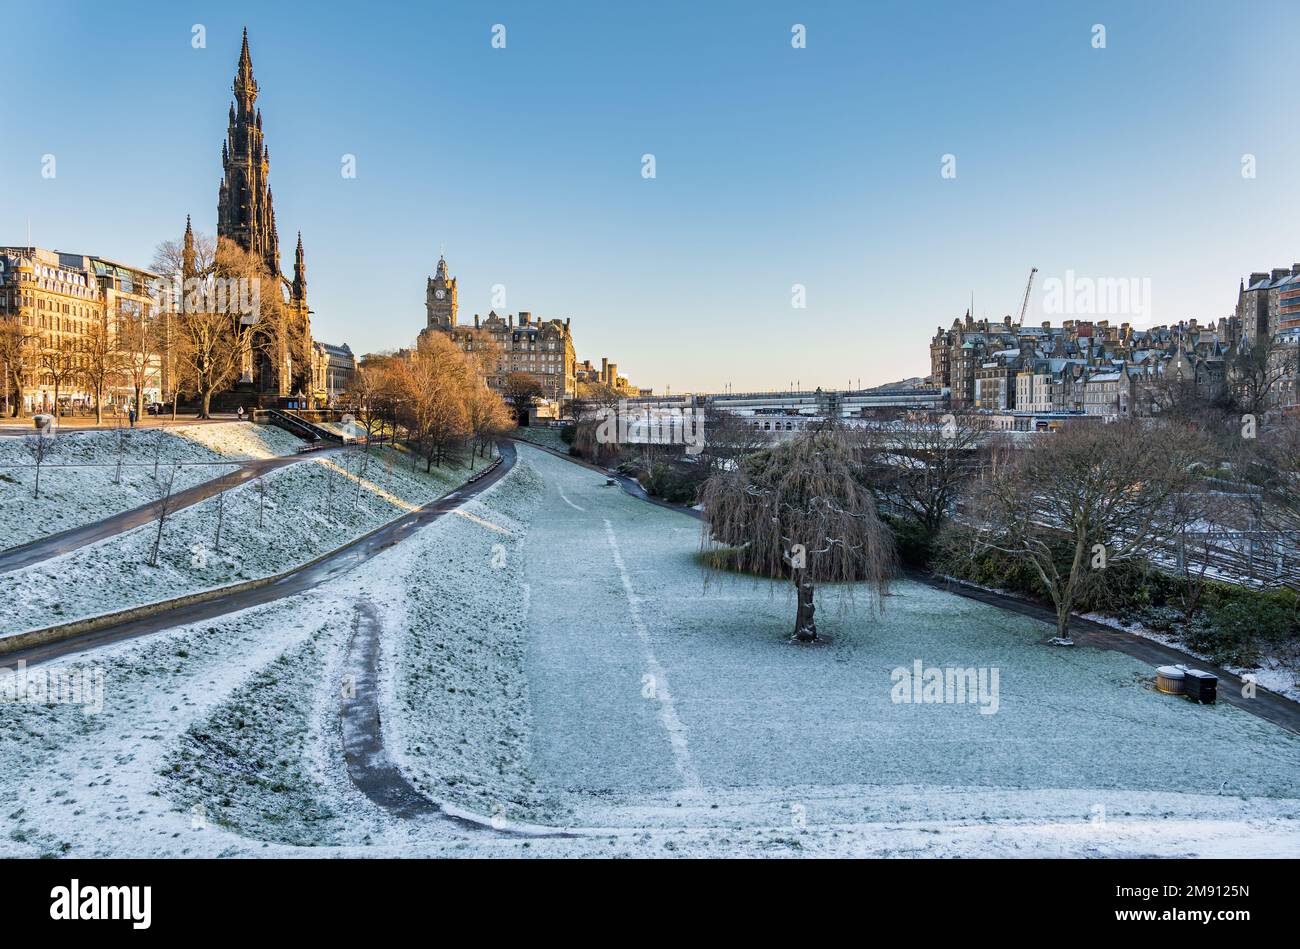 Princes Street Gardens, Edinburgh, Scotland, UK, 16th January 2023. UK Weather: A hard frost and sunny morning seen in Princes Street Gardens with a view of the city centre and the Scott monument and Balmoral clock tower. Credit: Sally Anderson/Alamy Live News Stock Photo